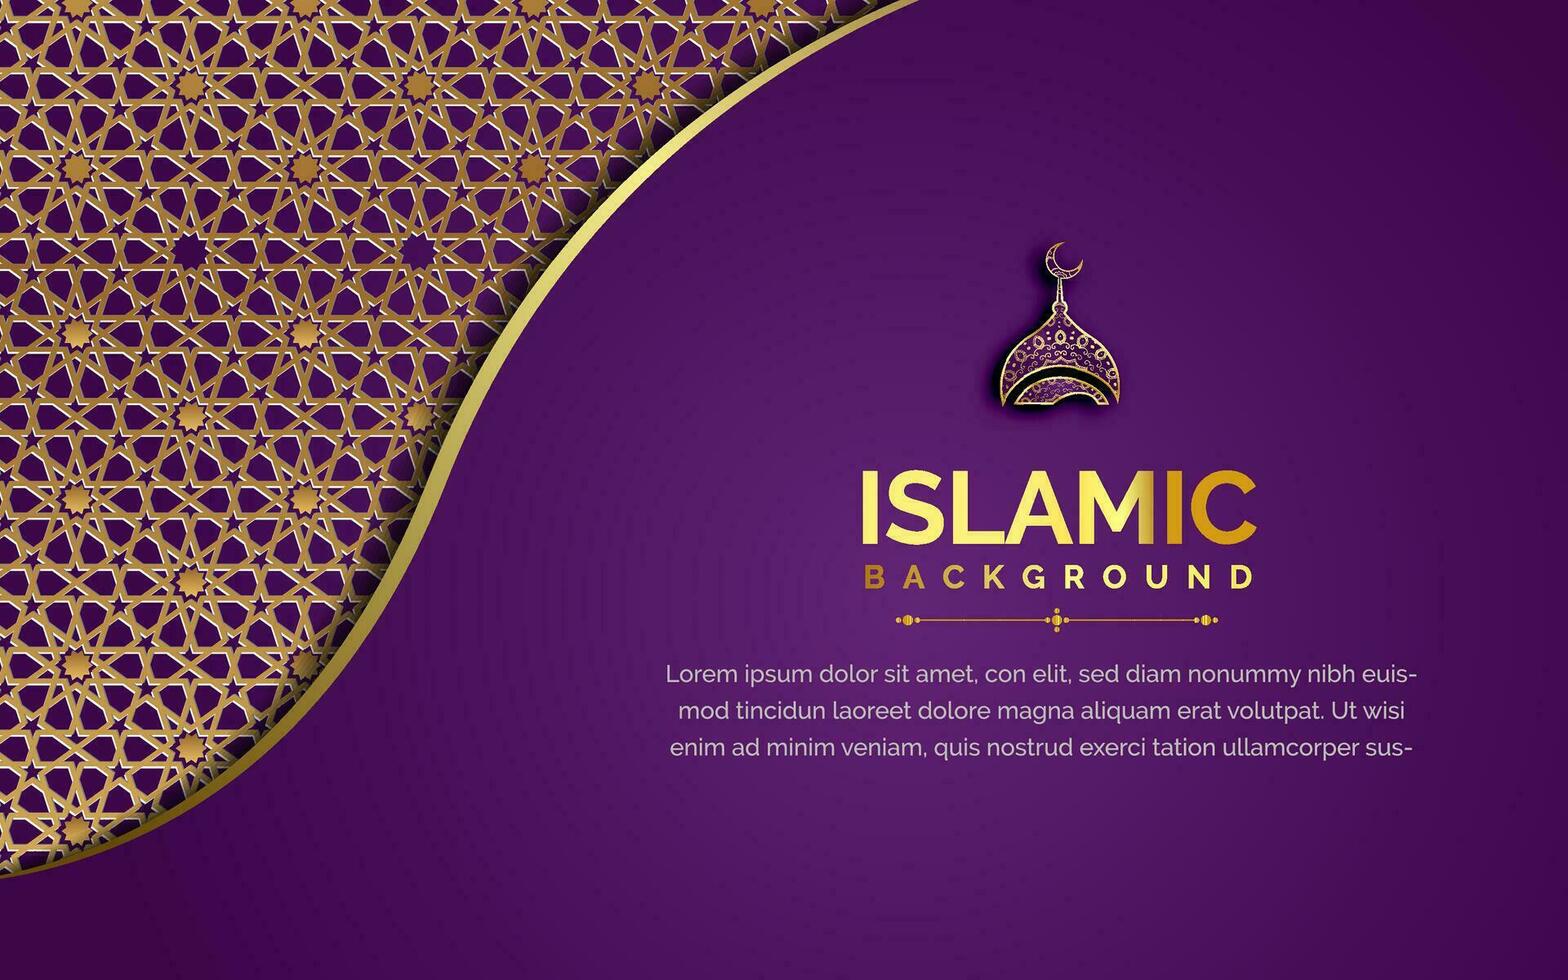 Background and banner deisgn vector